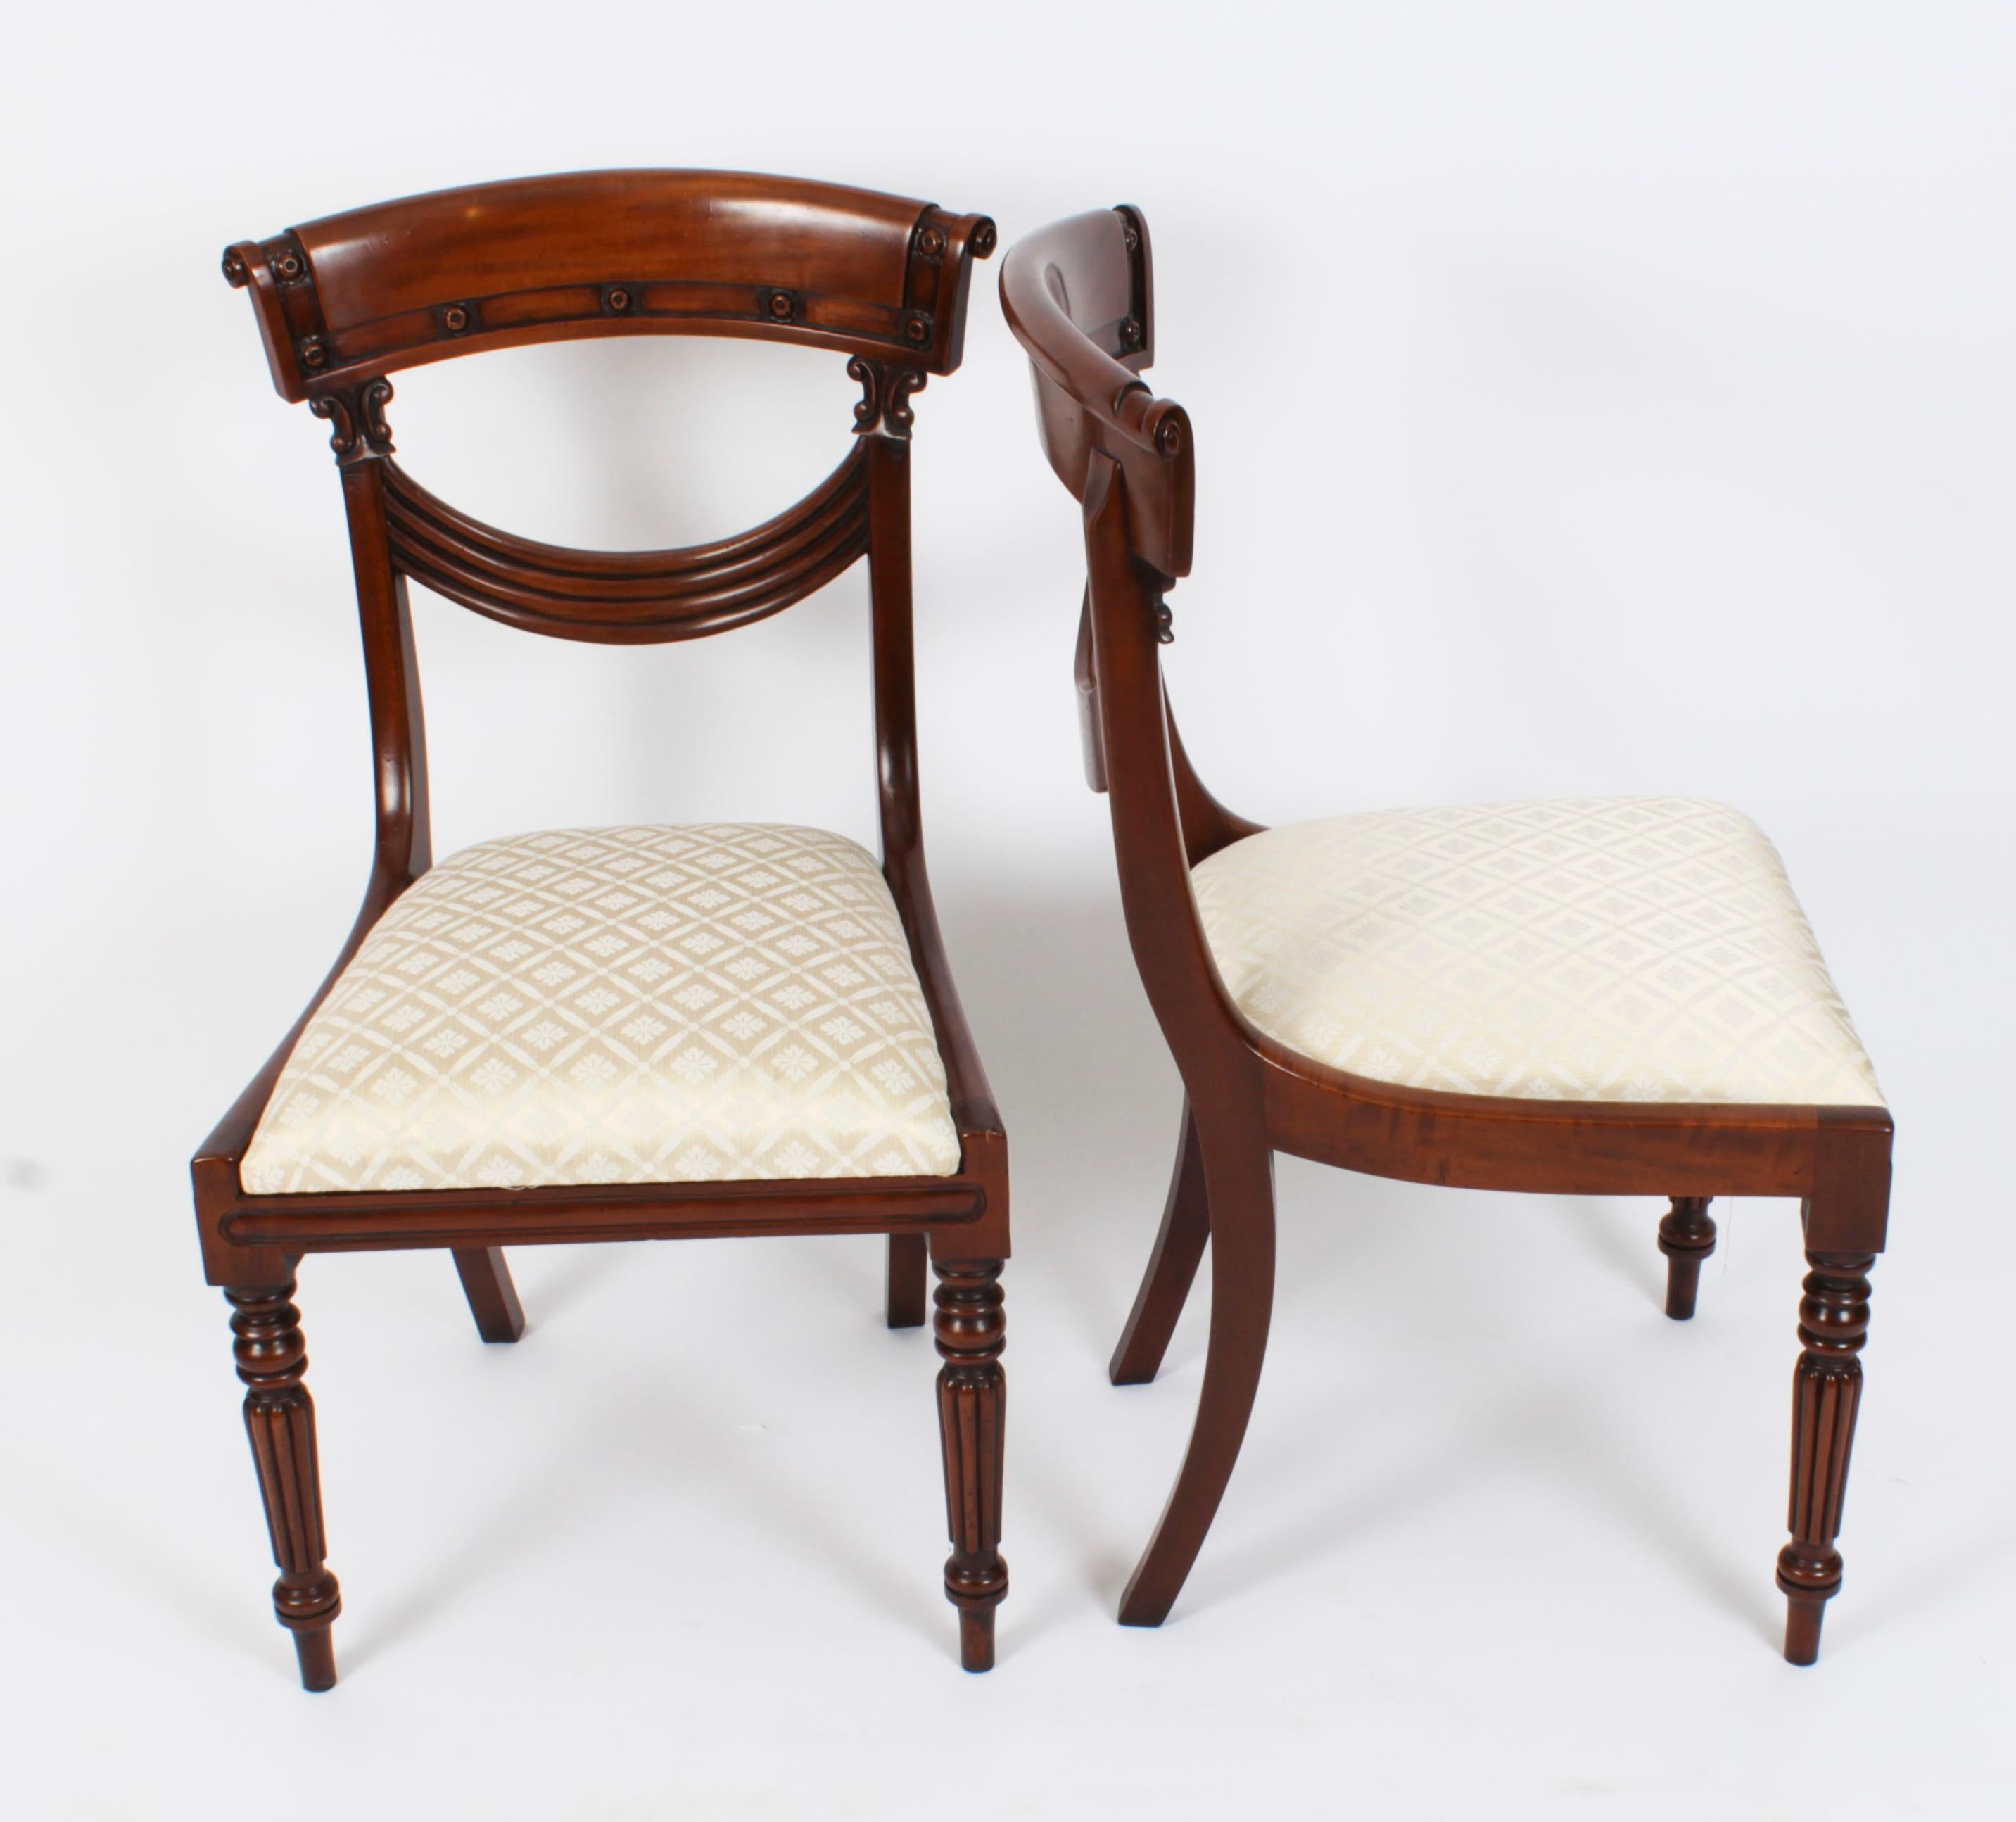 A delightful Vintage pair of superb swag back dining chairs, dating from the second half of the 20th Century.

Masterfully crafted in beautiful solid mahogany throughout, the finish and attention to detail on display are truly